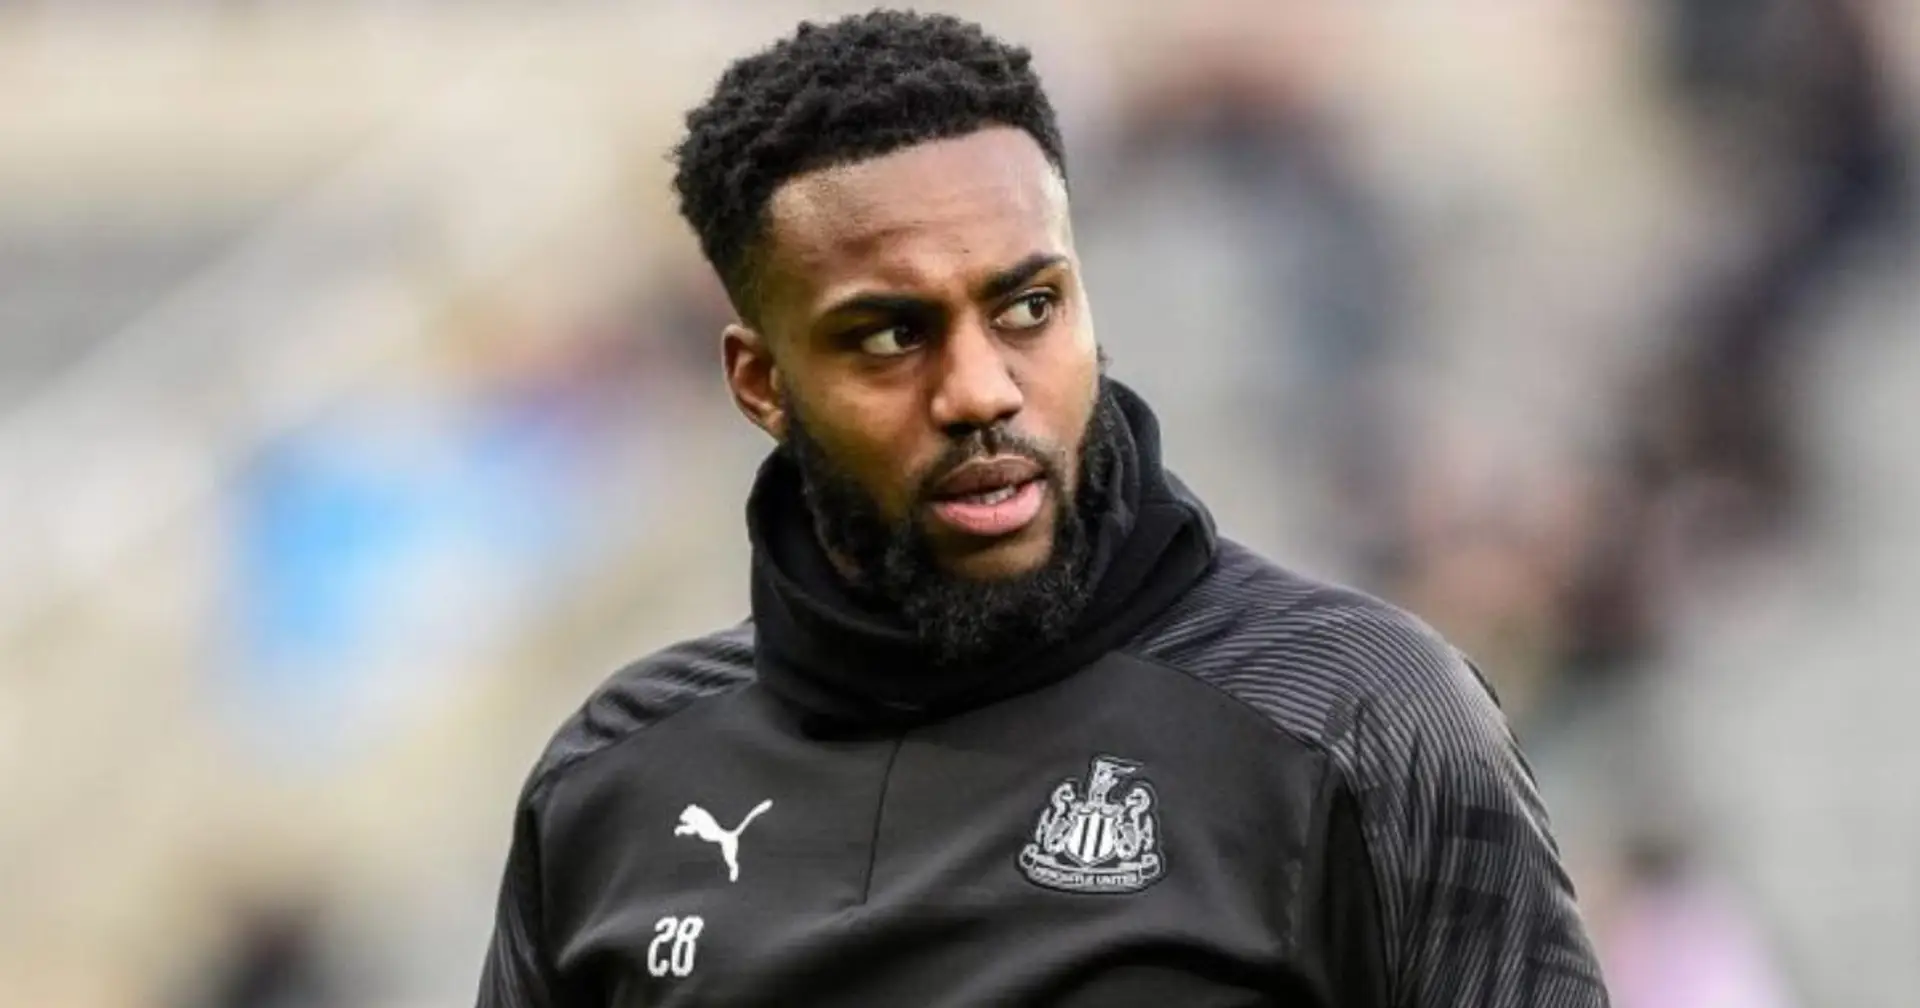 'I don't give a f*** about the nation's morale': Danny Rose slams June return plans for Premier League